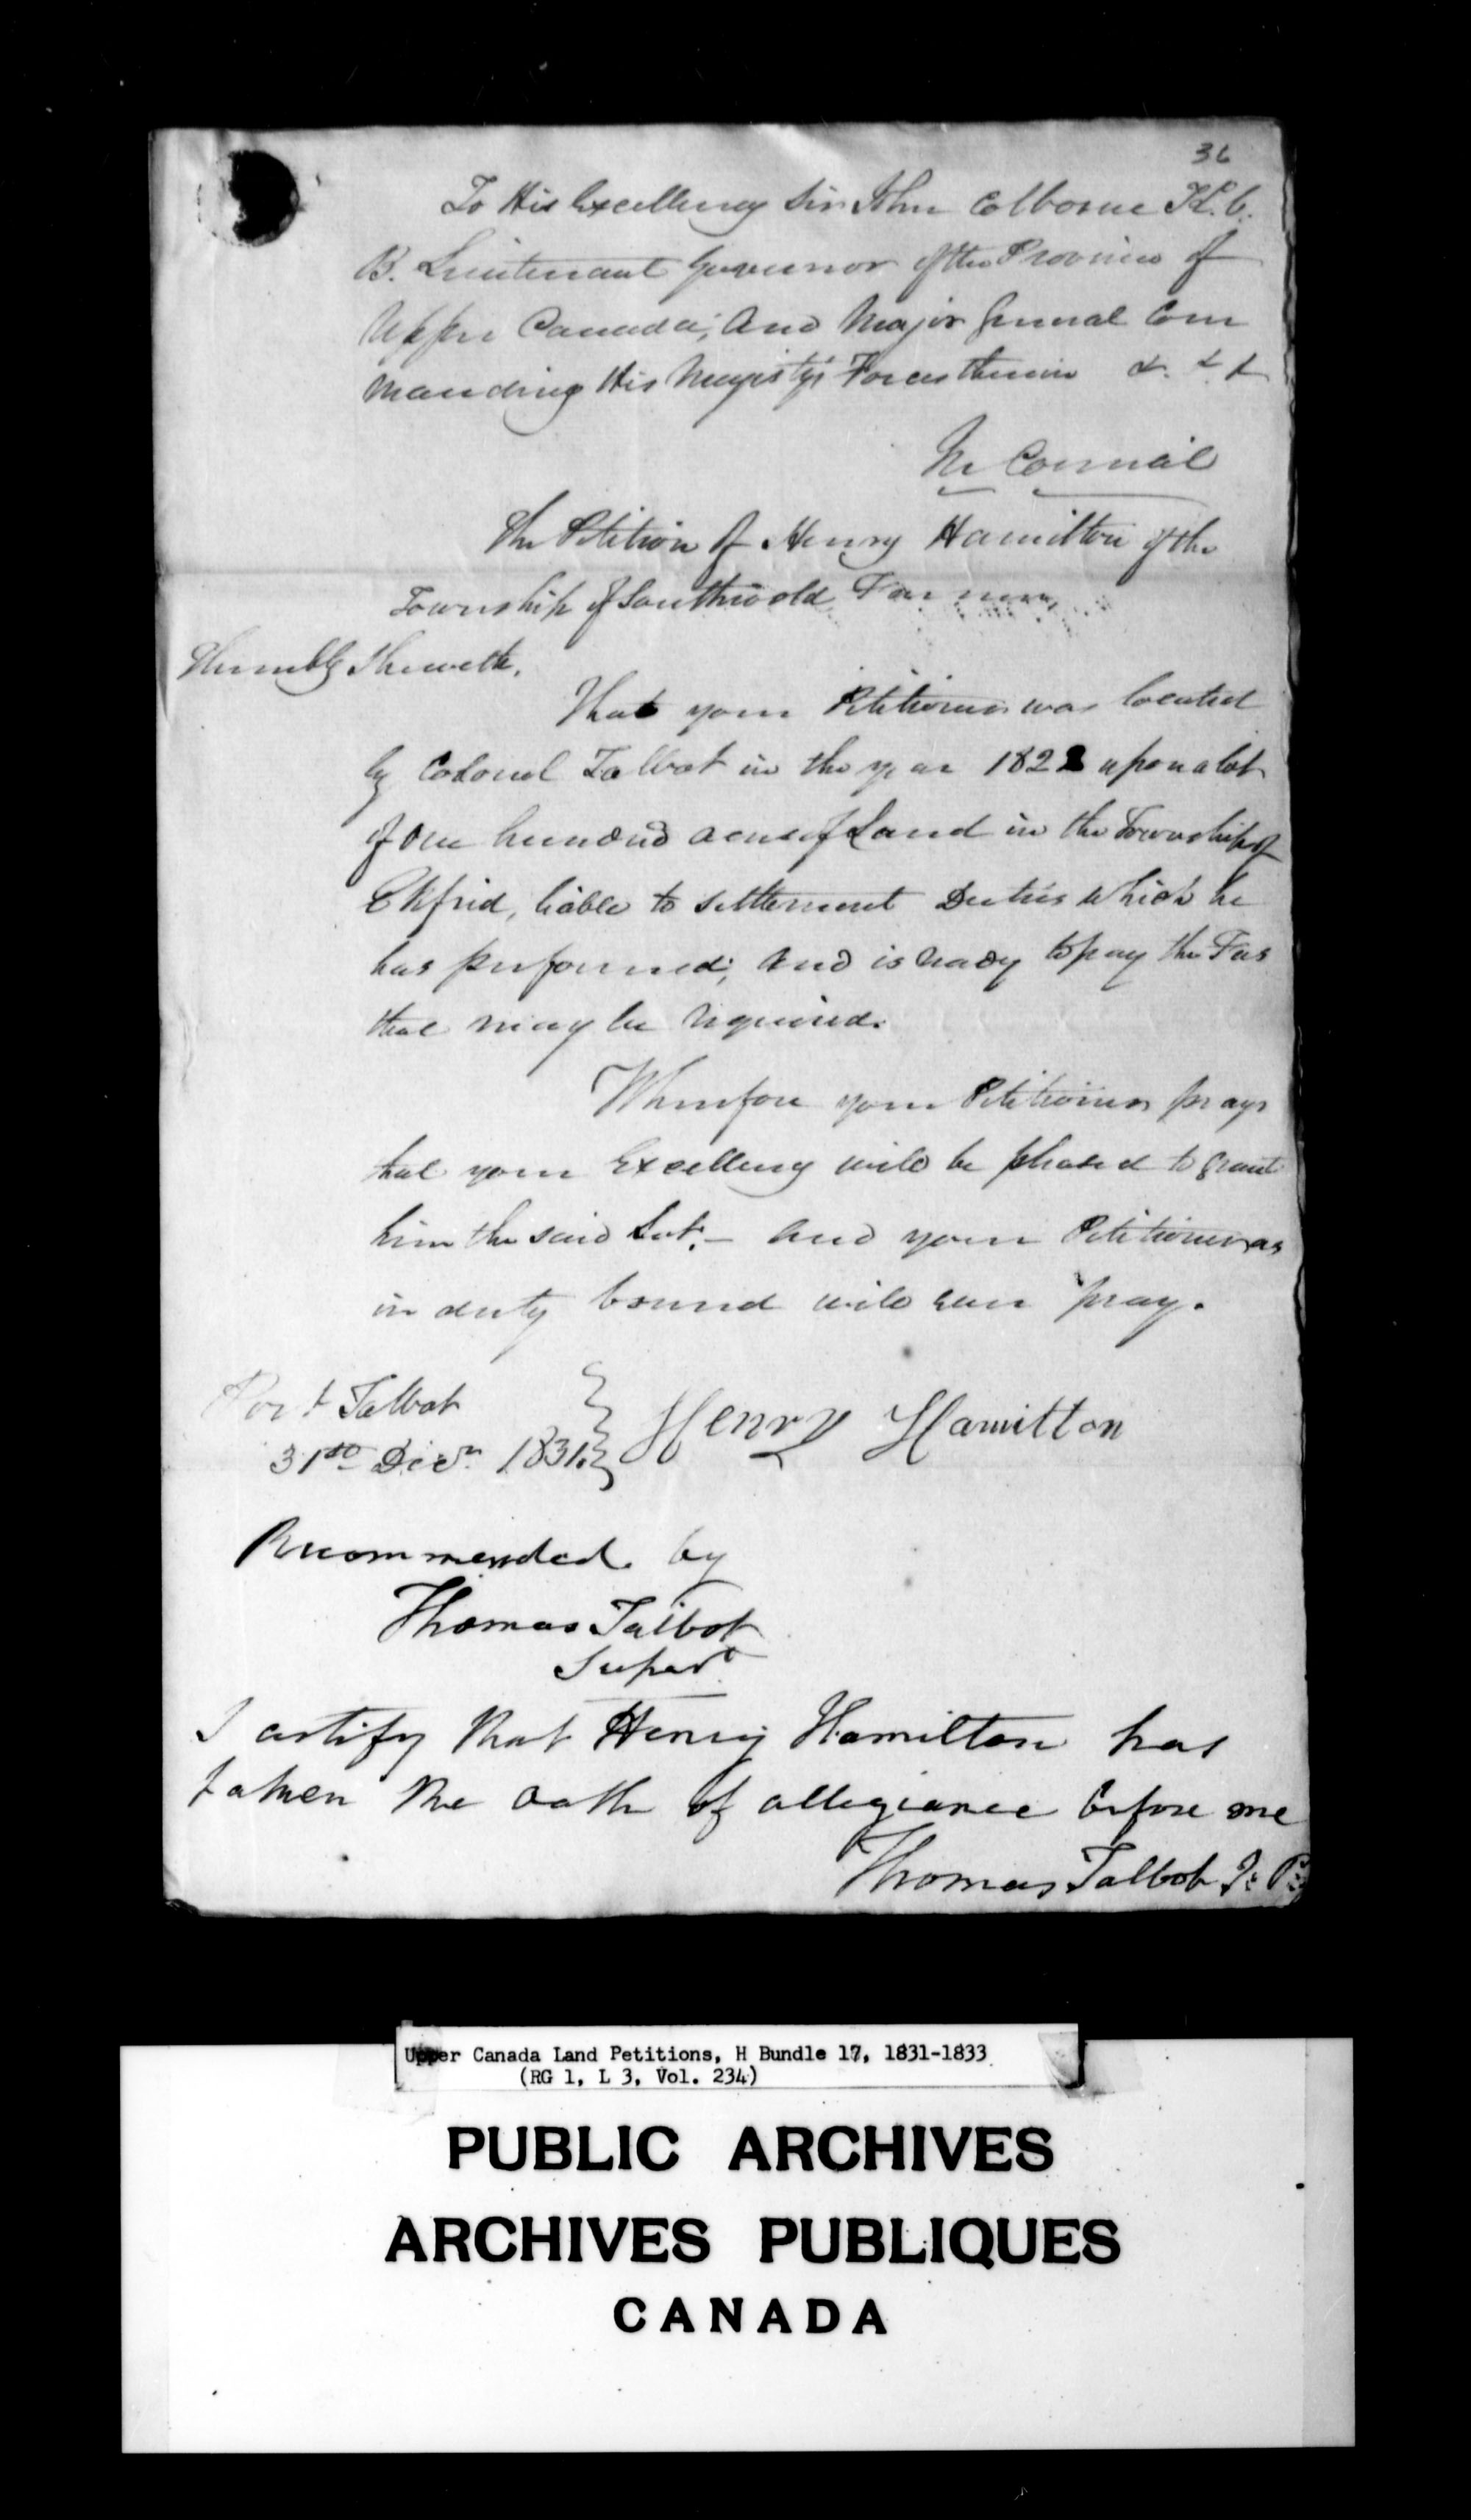 Title: Upper Canada Land Petitions (1763-1865) - Mikan Number: 205131 - Microform: c-2051